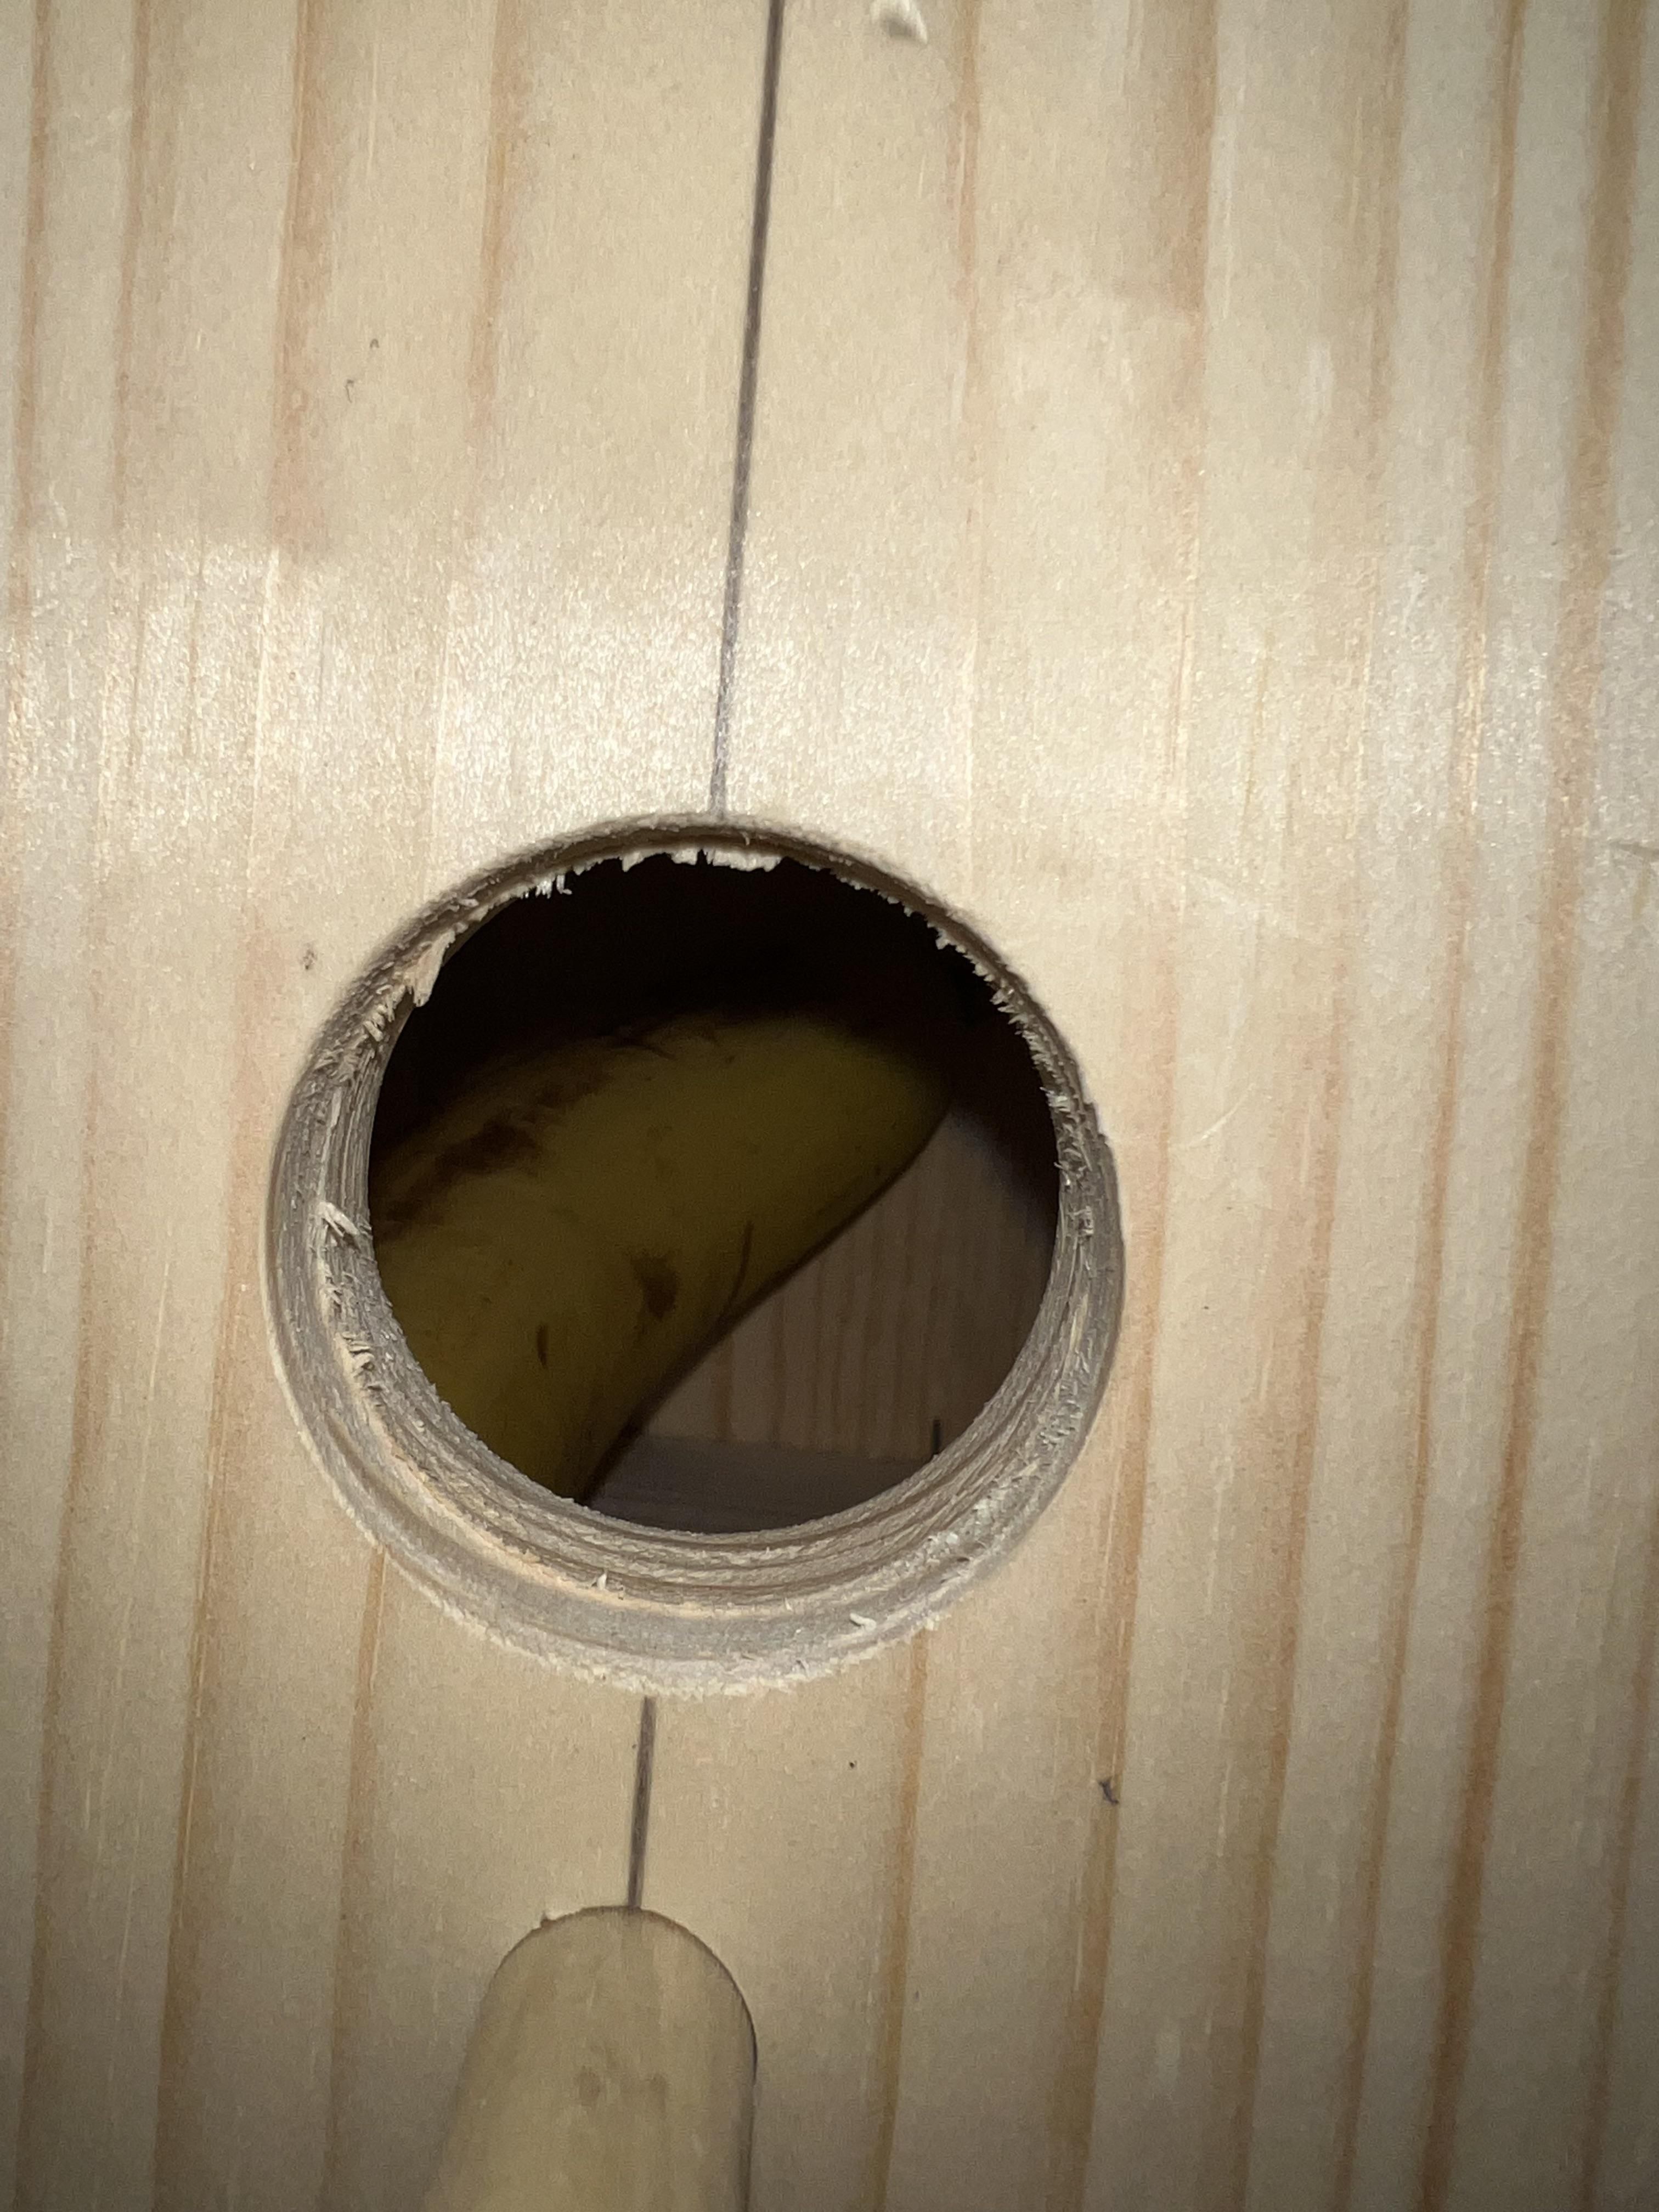 Built a birdhouse with my 4 year. Accidentally sealed a banana in